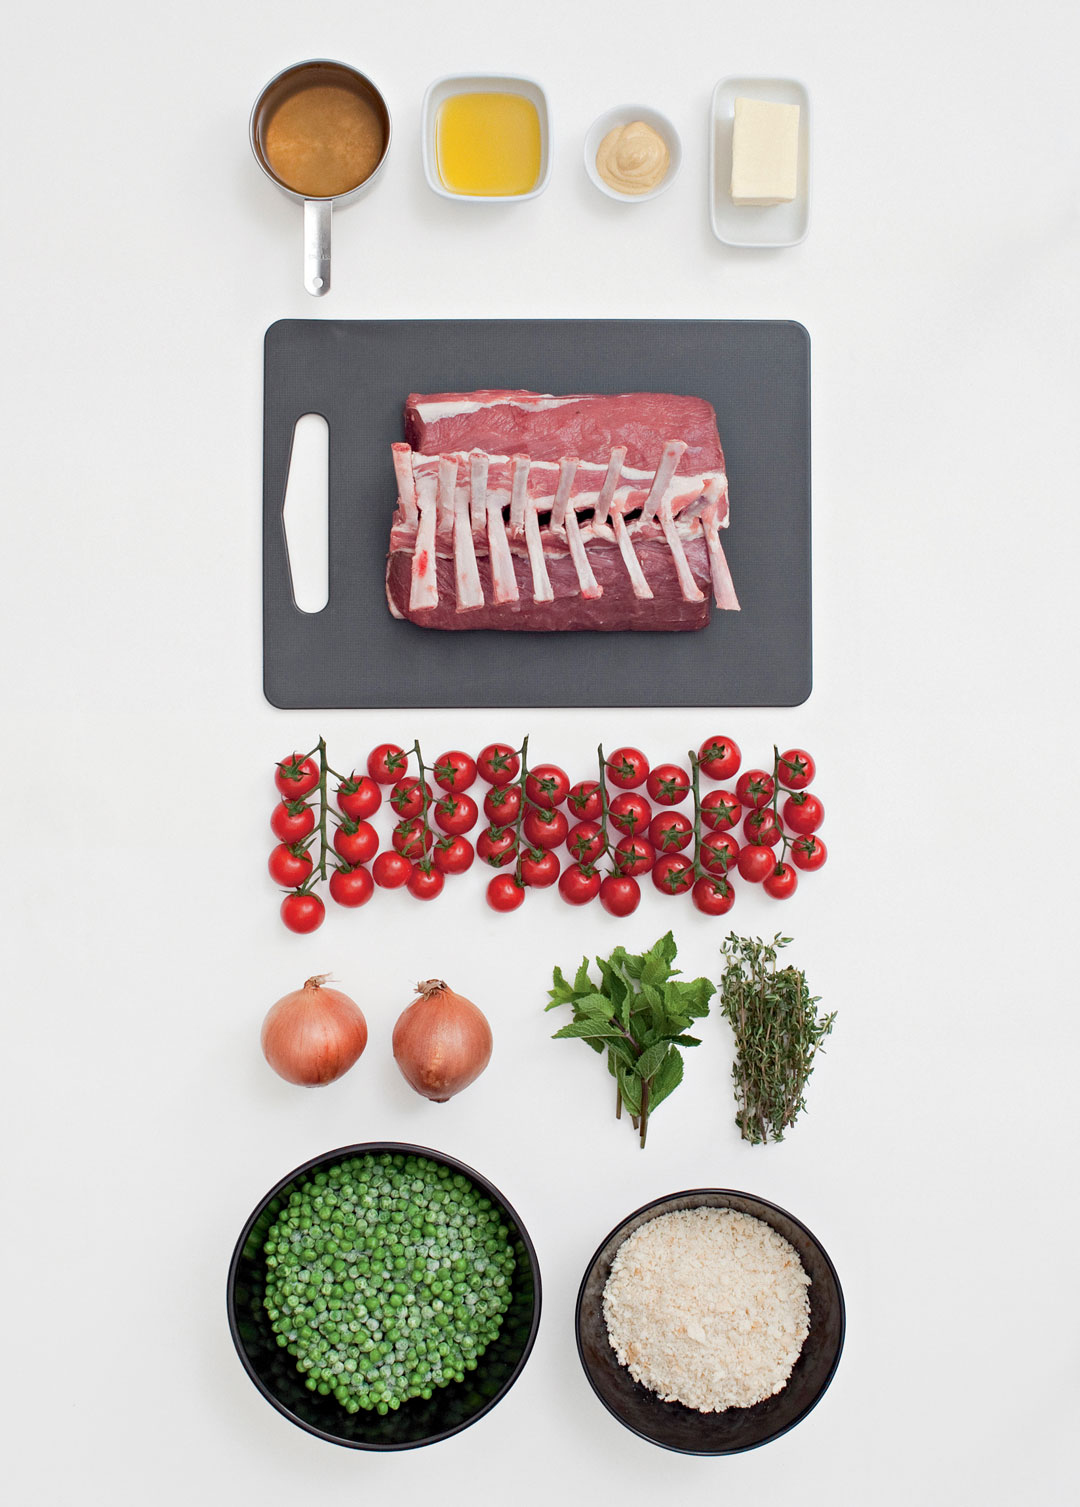 The ingredients for herb crusted lamb